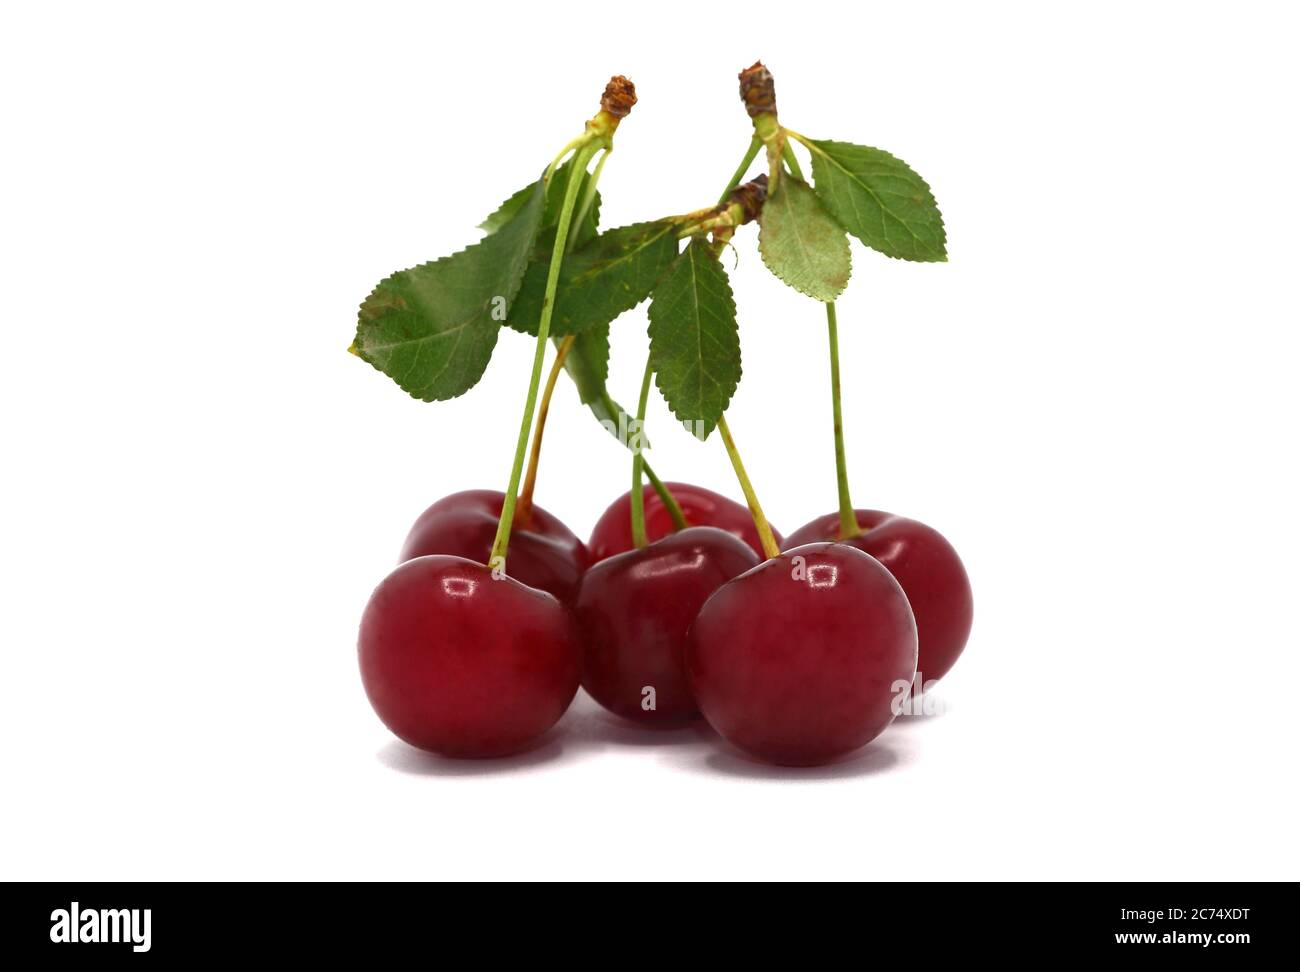 Several ripe cherries on a light background. Natural product. Natural color. Close-up. Stock Photo